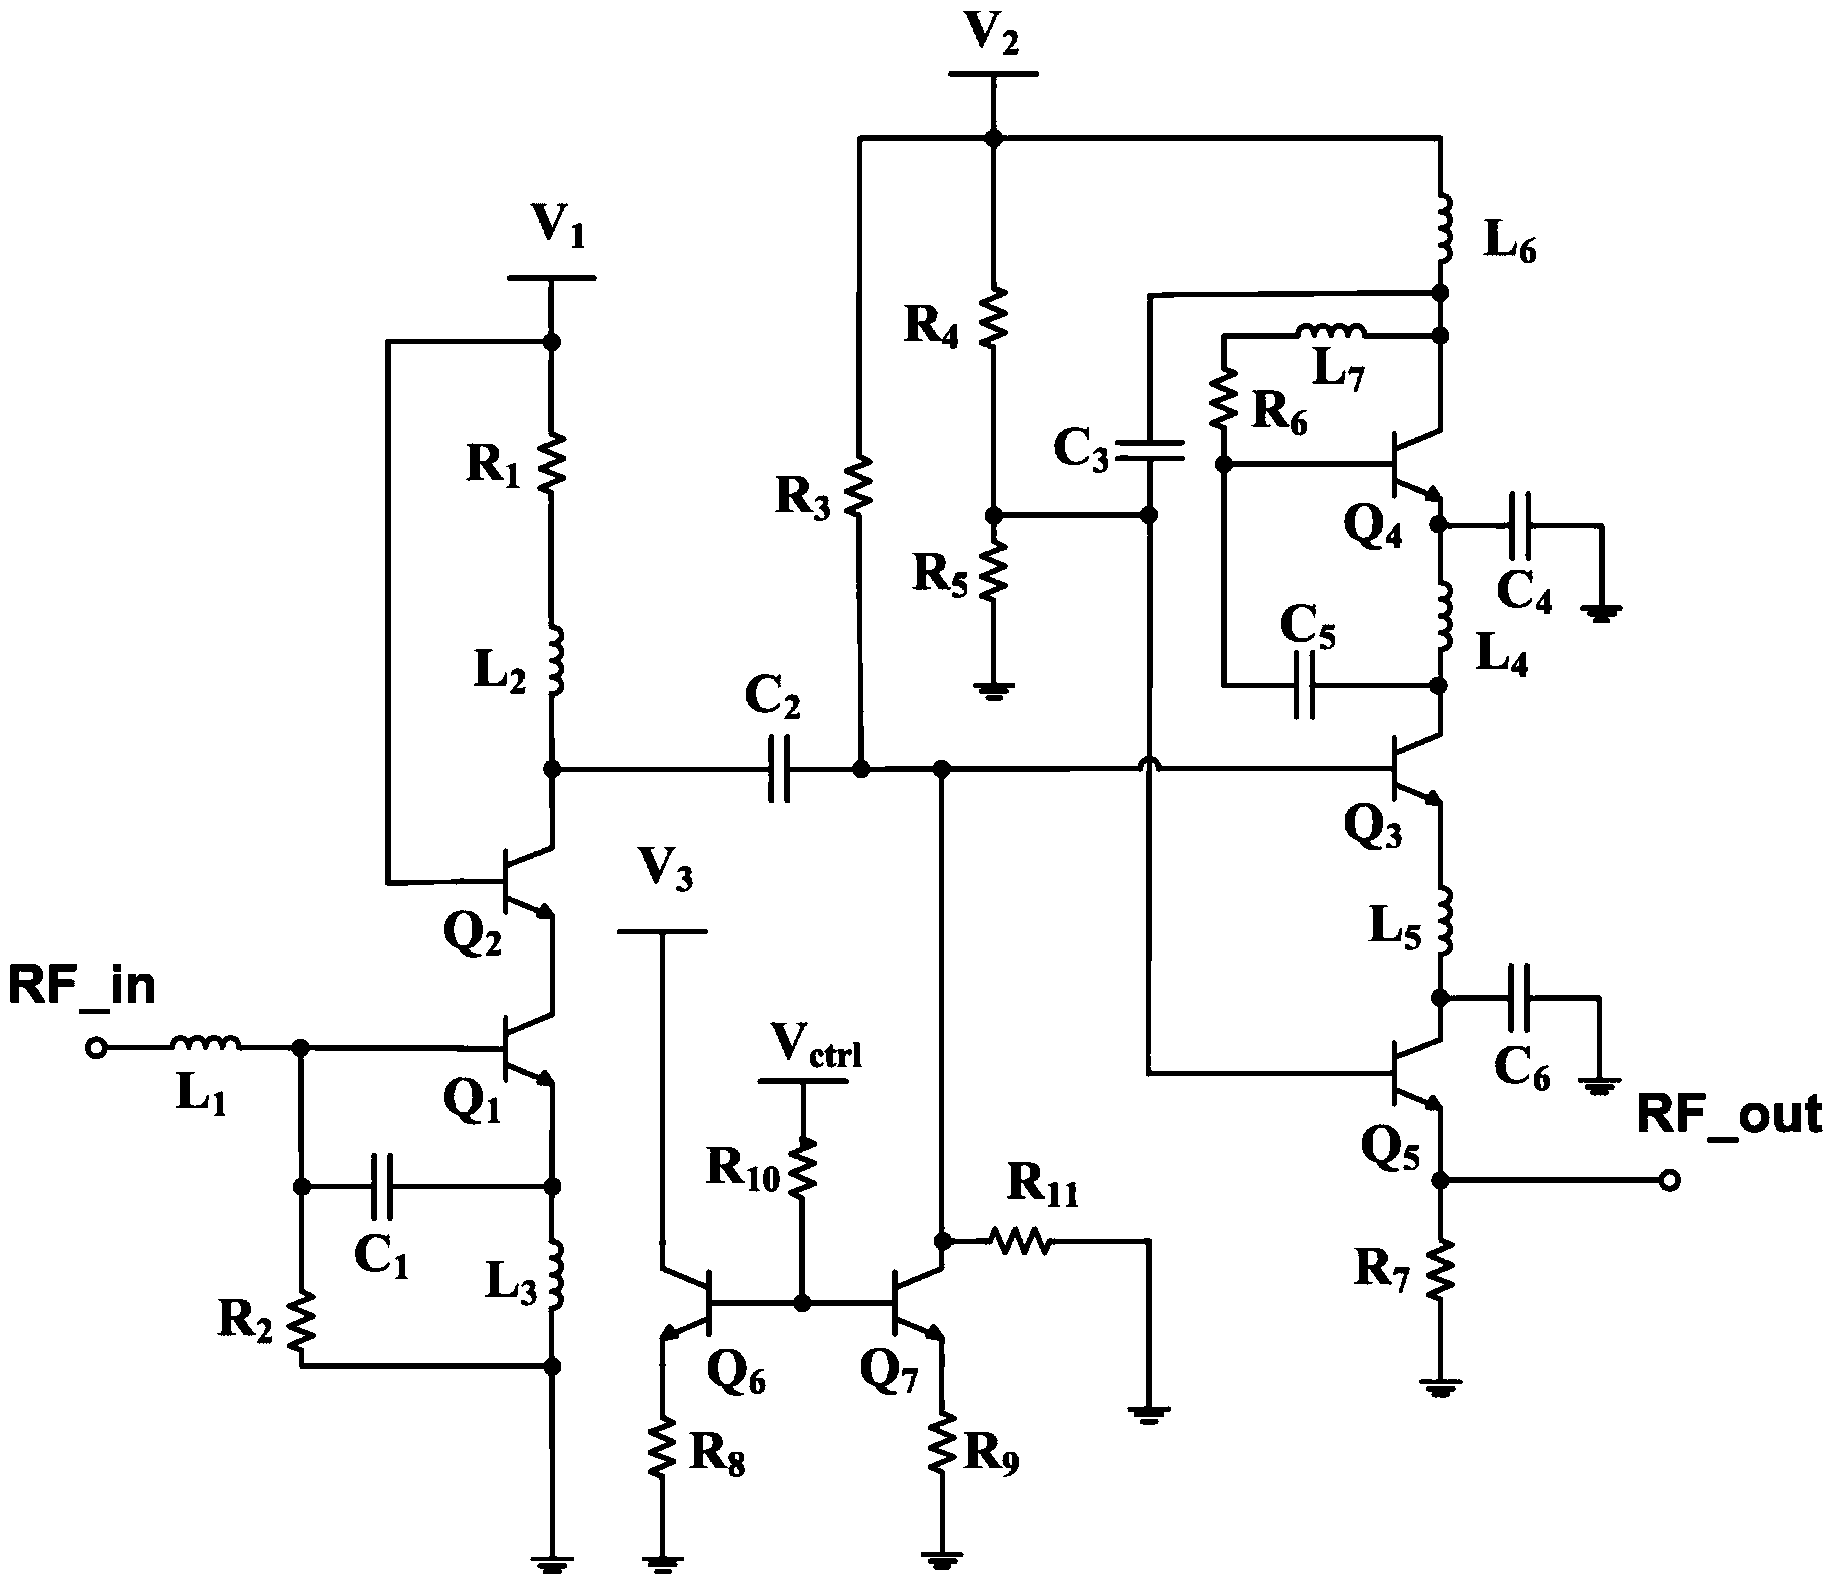 Ultra-wideband variable gain amplifier